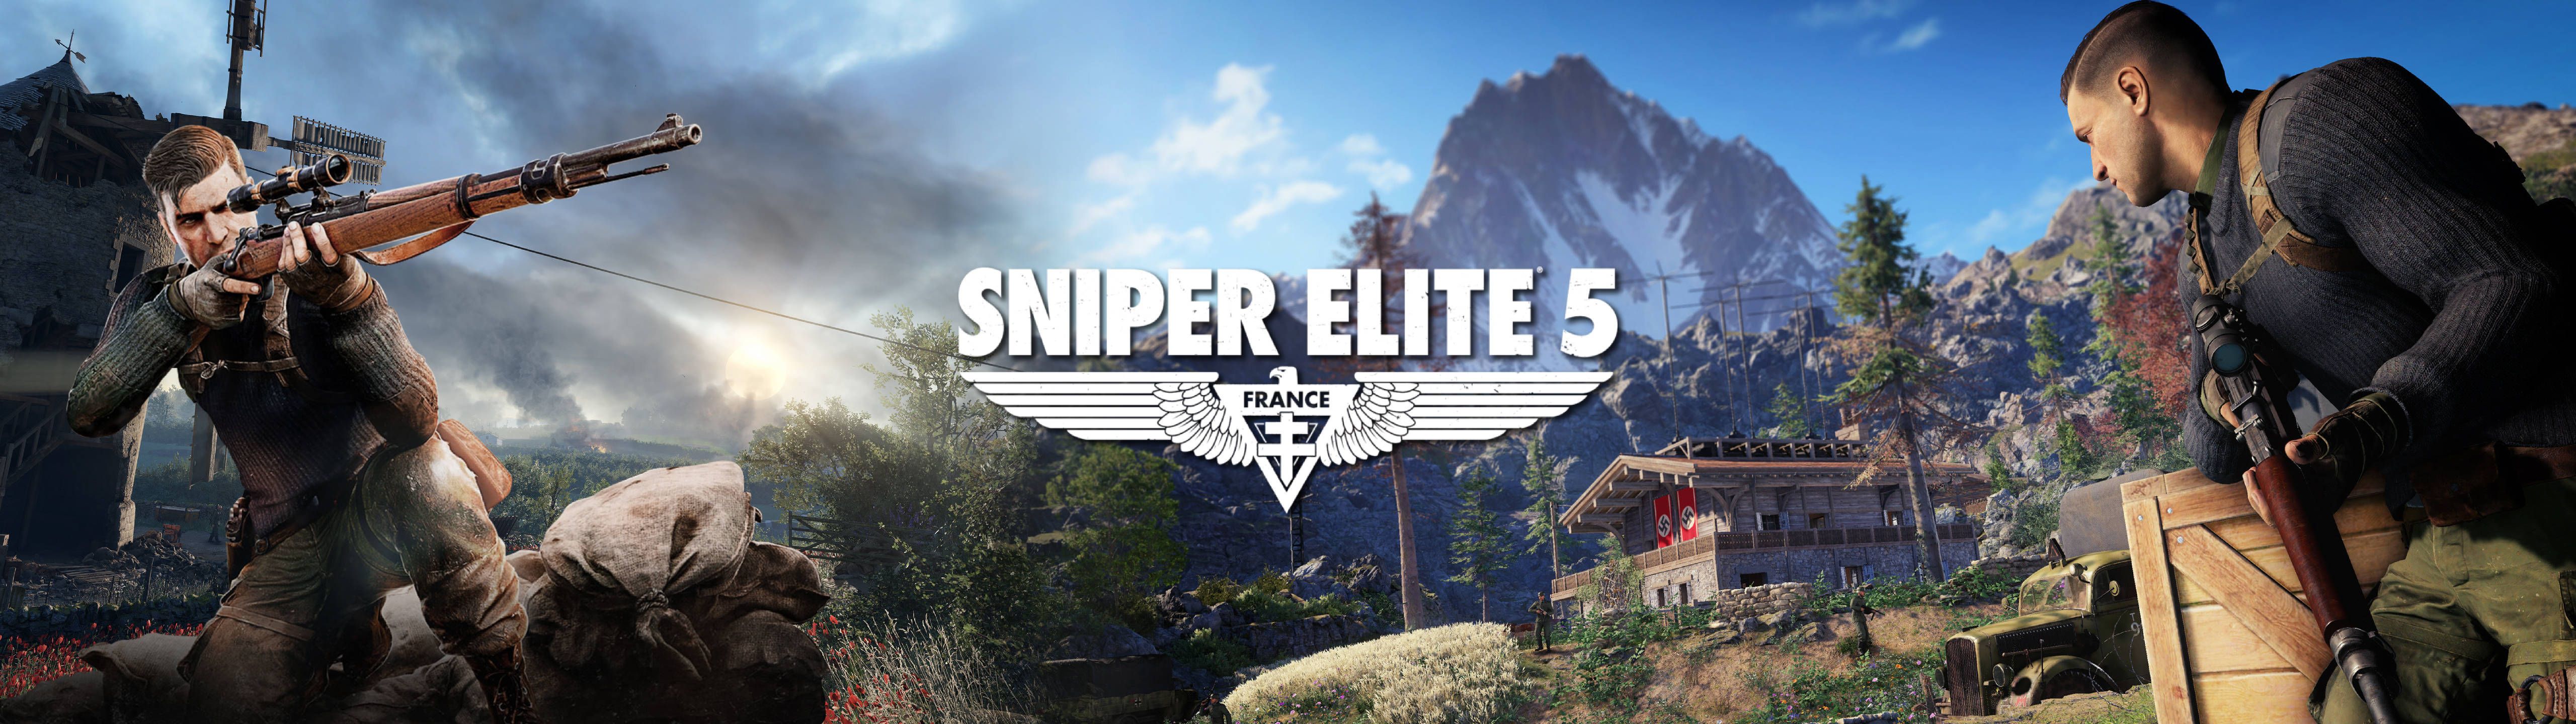 Sniper Elite 5 - Experience the intense, immersive, and realistic shooter game - 5120x1440